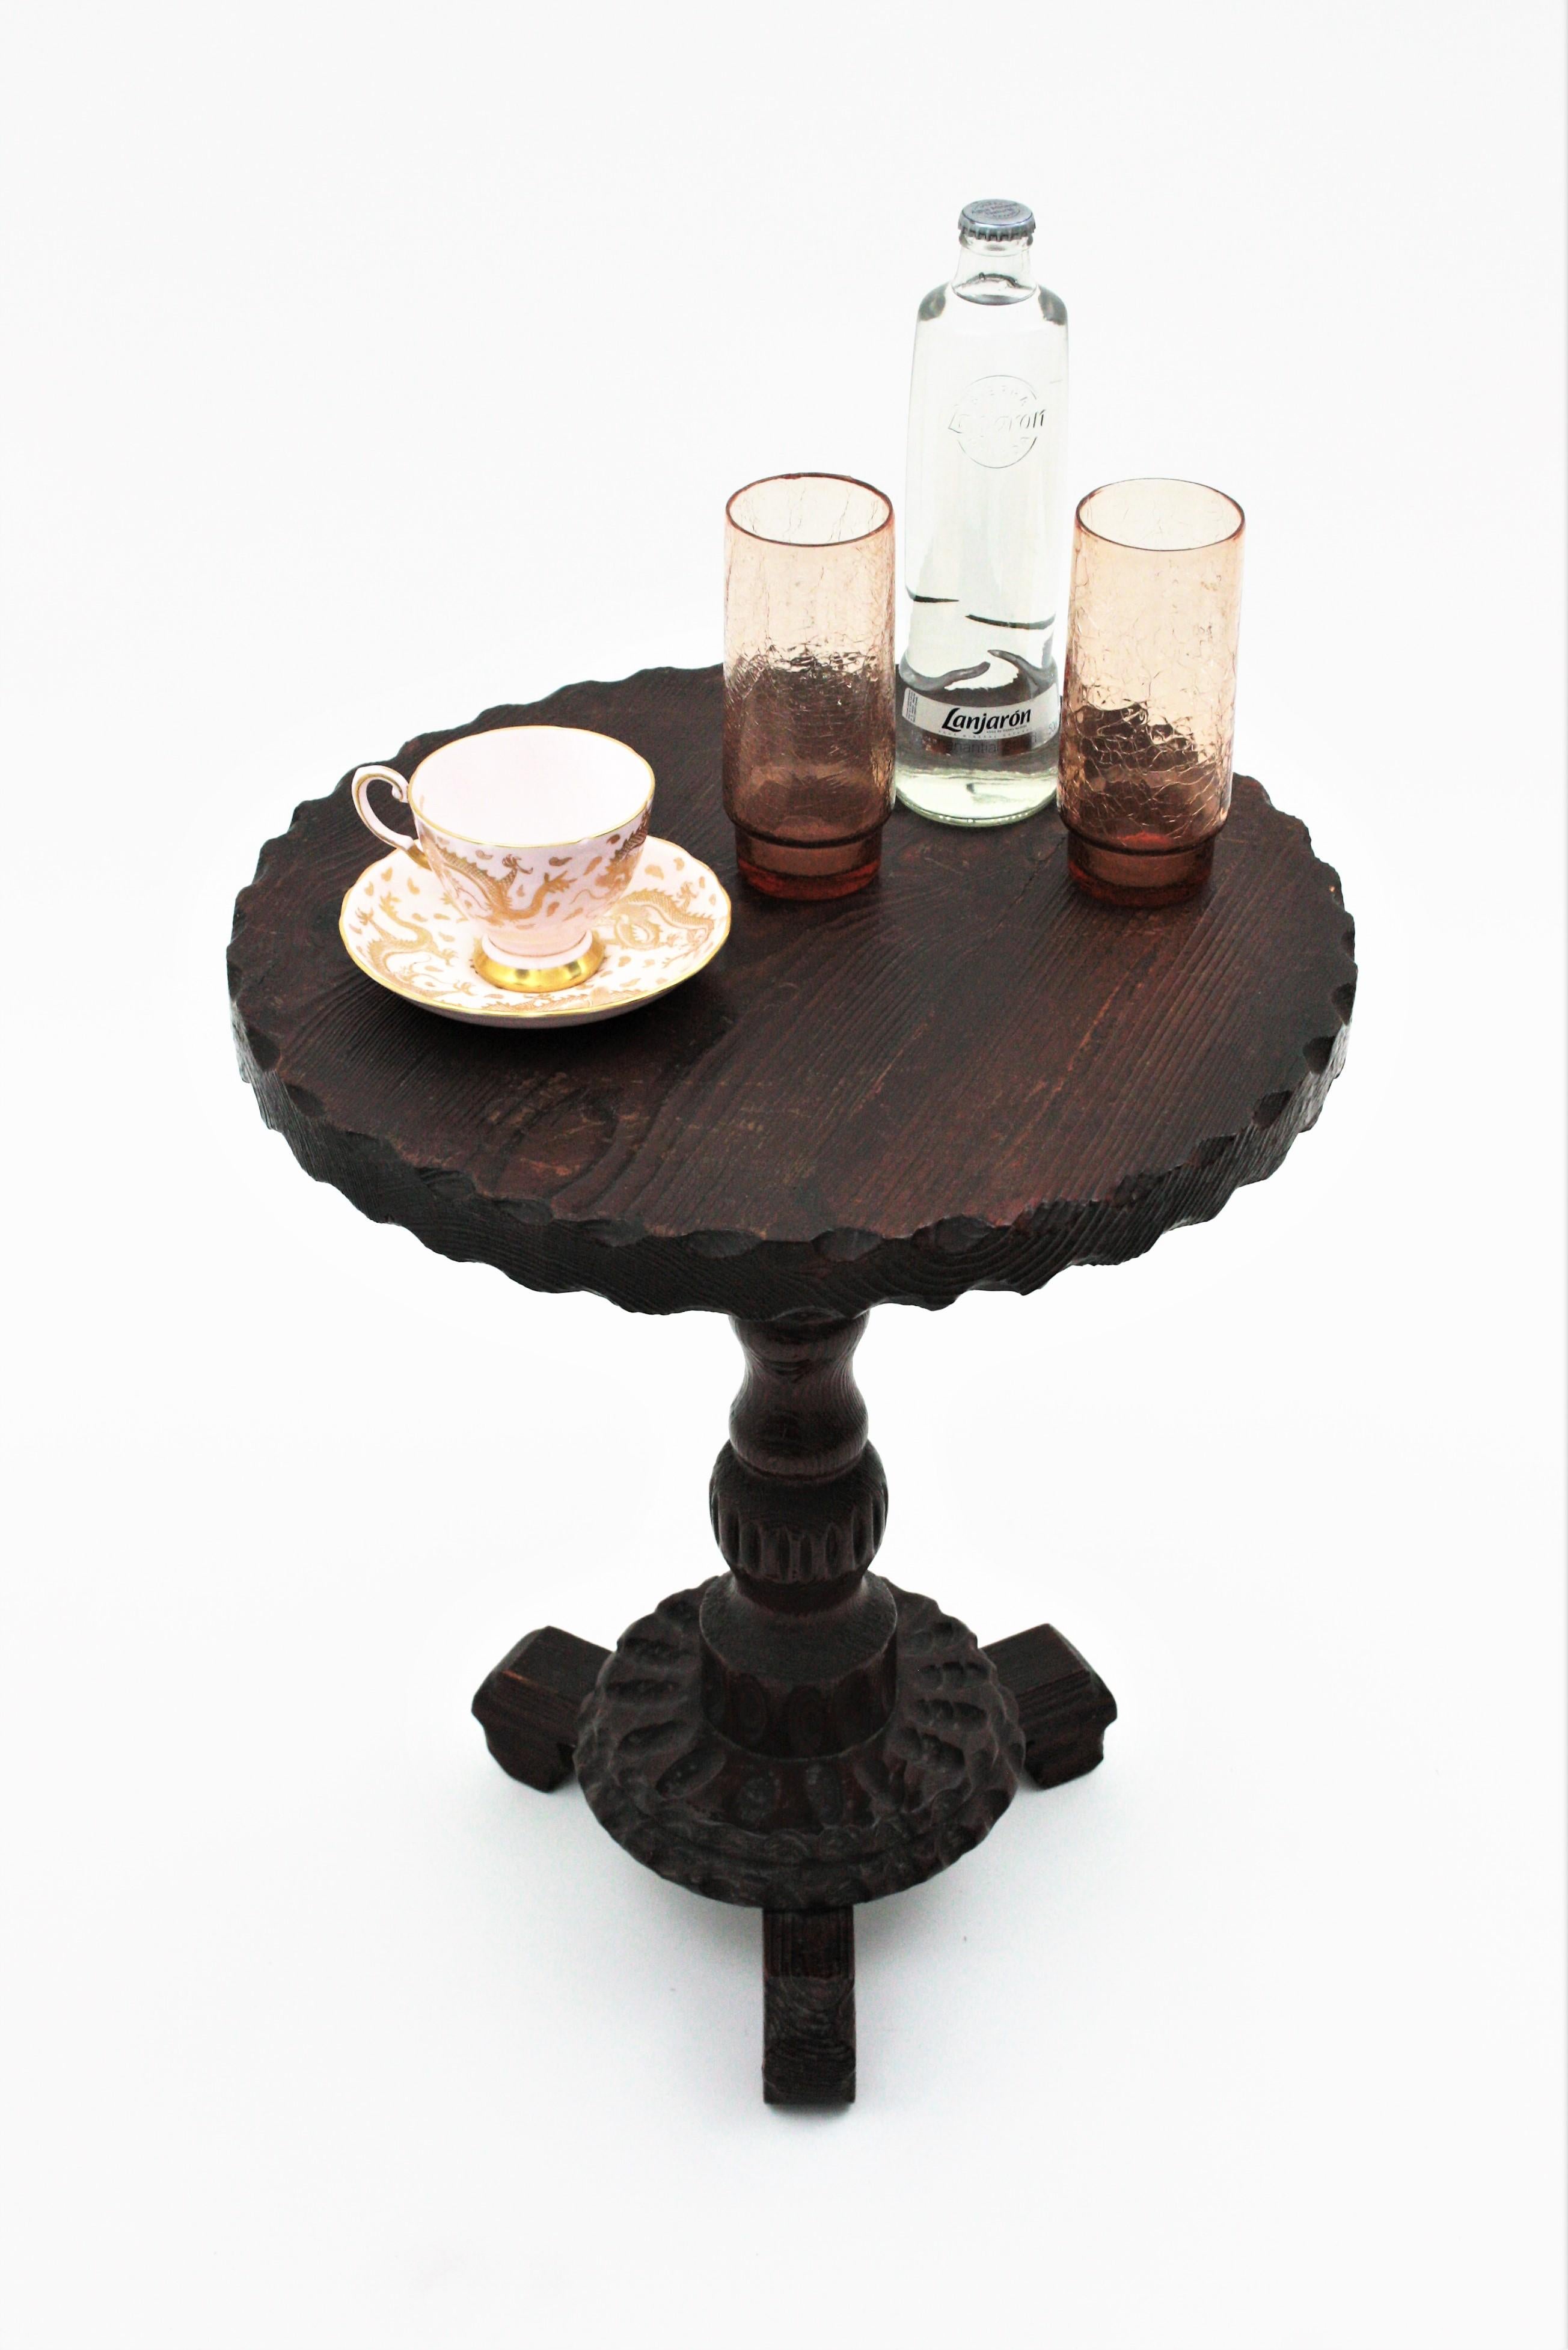 Hand-carved pine wood gueridon table or occassional table standing on tripod base. Spain, 1940s.
The tabletop in round shape has scalloped details on the edge. It is supported on a turned wood stem and three carved legs.
This table has a rustic